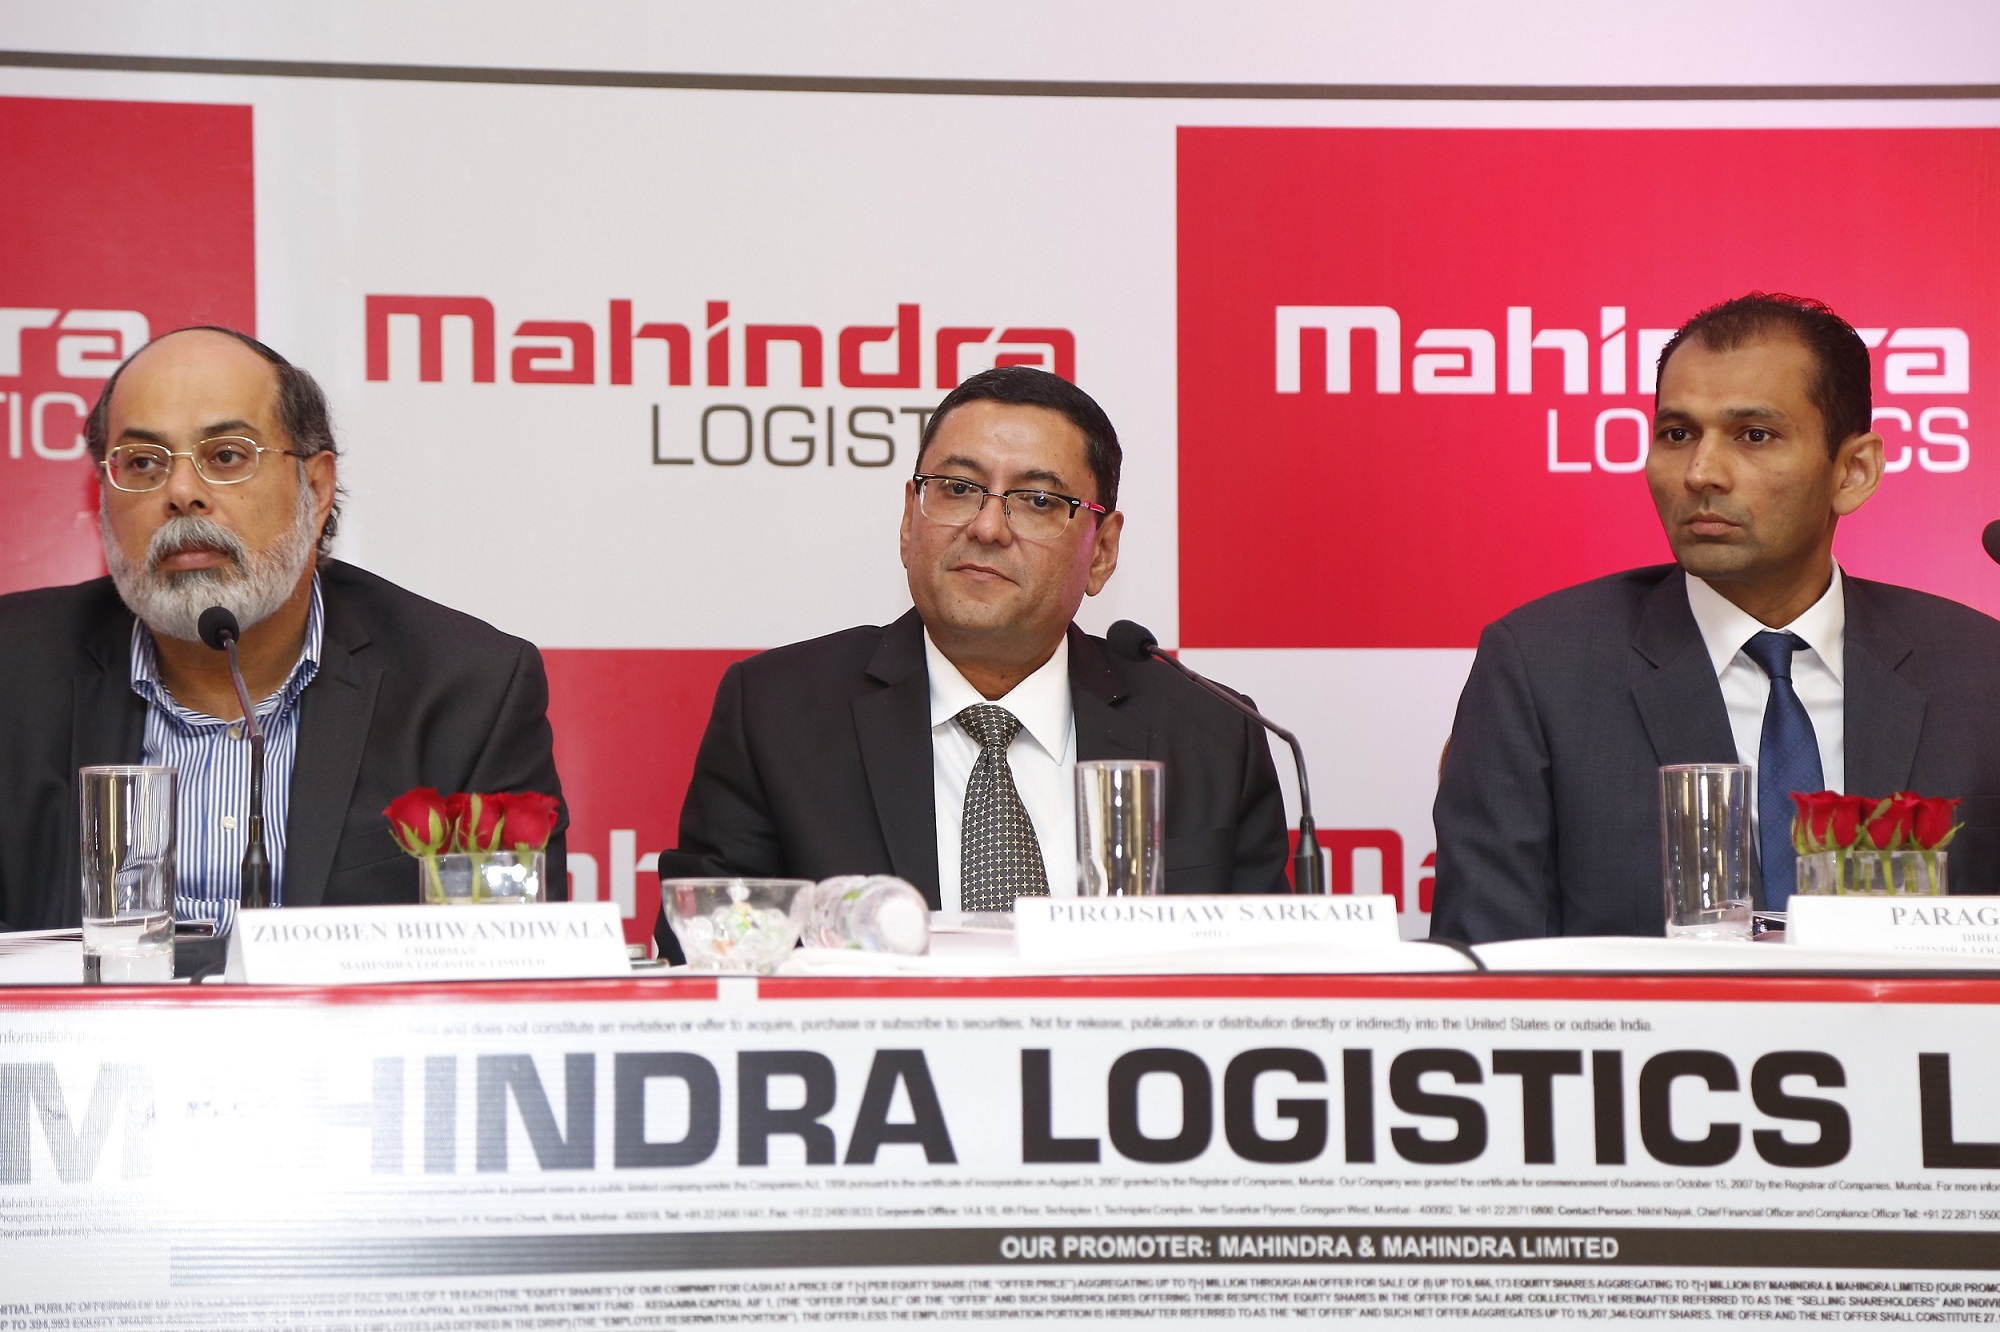  (L-R) – Mr. Zhooben Bhiwandiwala, Chairman, Mahindra Logistics Limited, Mr. Pirojshaw Sarkari, CEO, Mahindra Logistics Limited and Mr. Parag Shah, Director, Mahindra Logistics Limited addressing the media at a press conference held today in Mumbai to announce the company’s forthcoming IPO - Photo By Sachin Murdeshwar GPN NETWORK